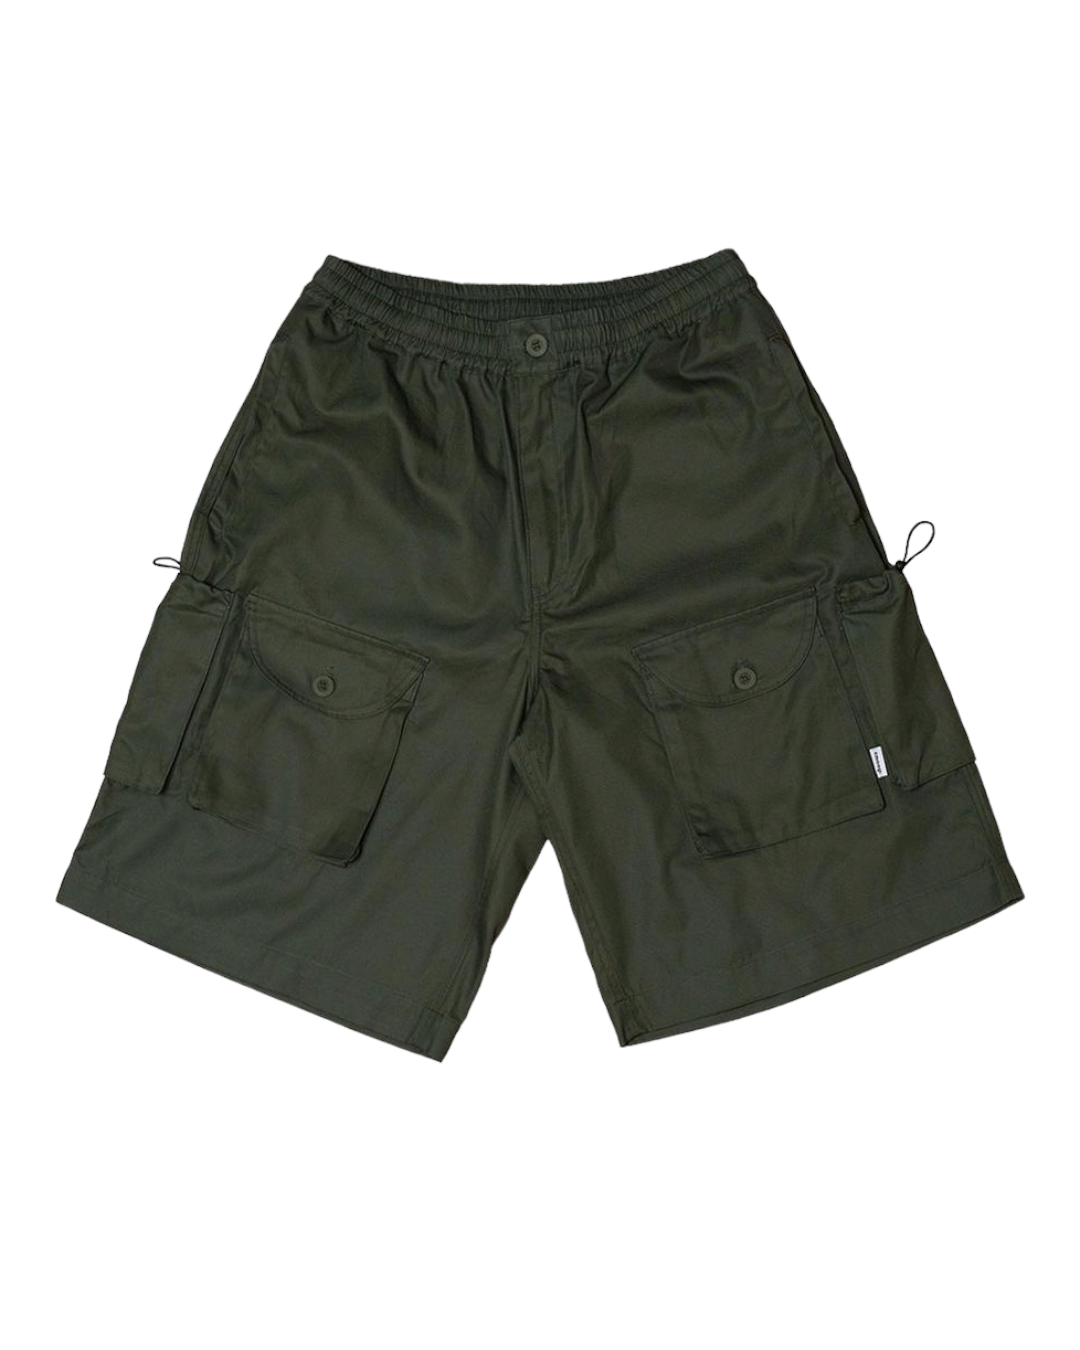 Wide cargo outdoor with Functional Pocket (Green)